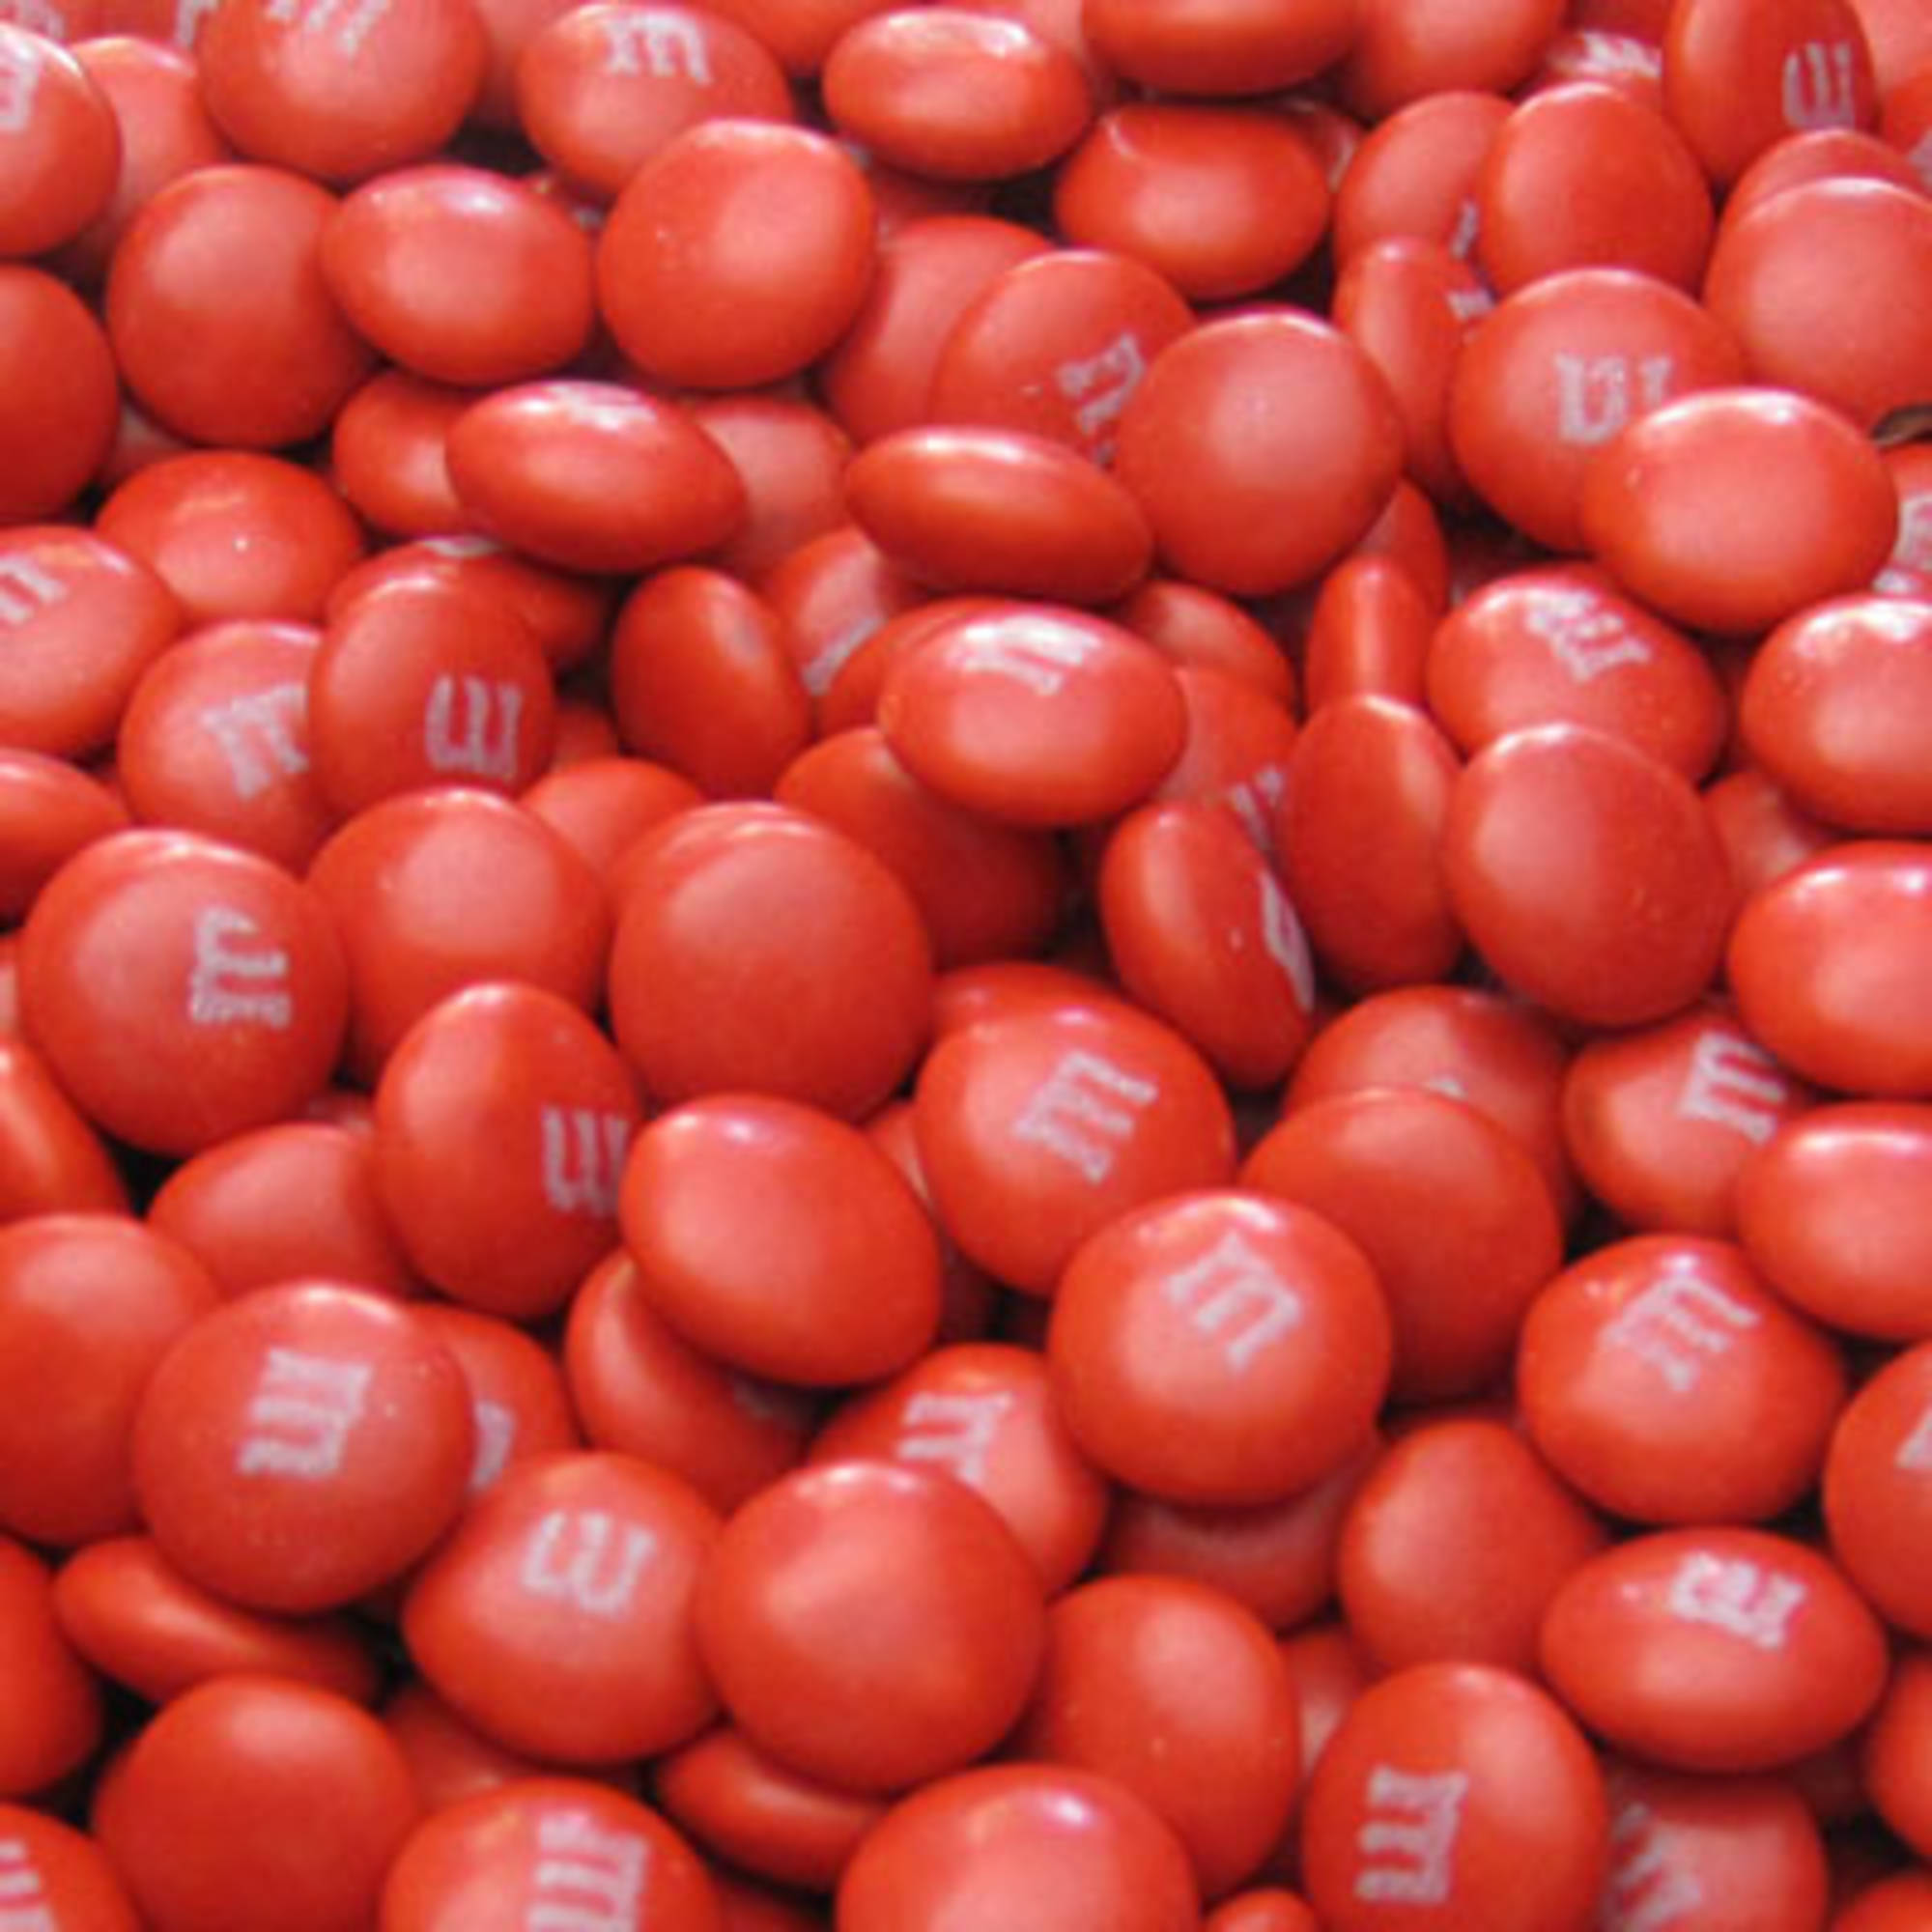 M&M's Milk Chocolate Bulk Red Candy - 5lbs of Bulk Resealable Bag of M&M's Red